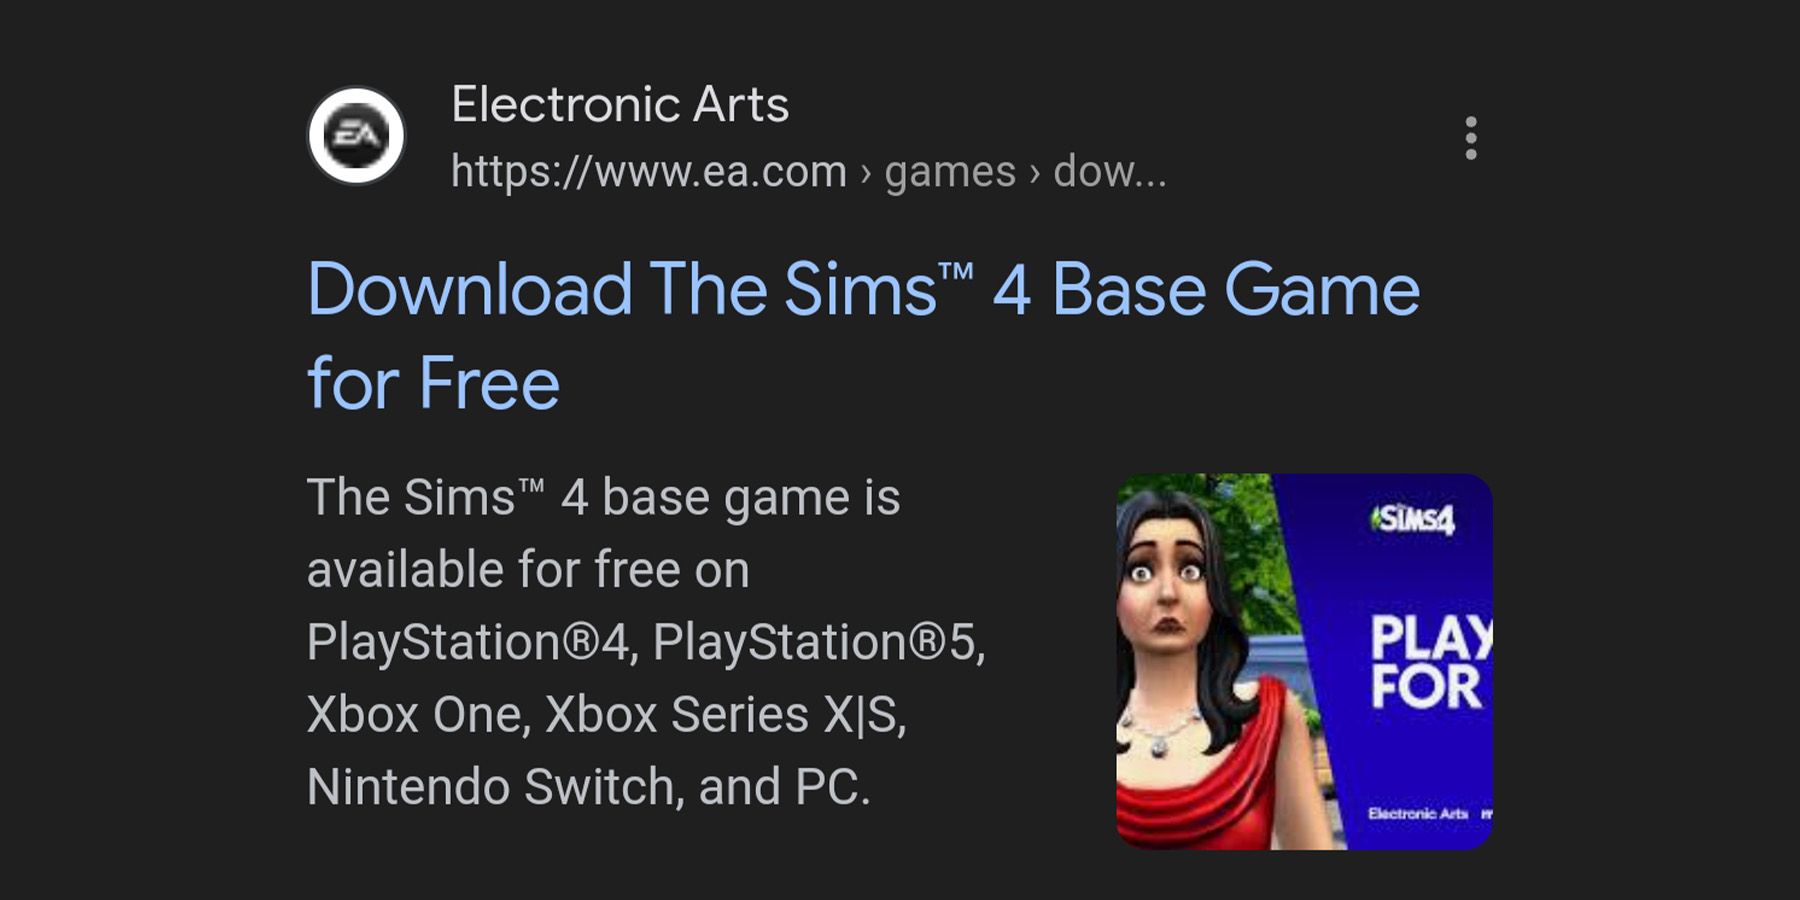 The Sims 4 accidental Nintendo Switch listing